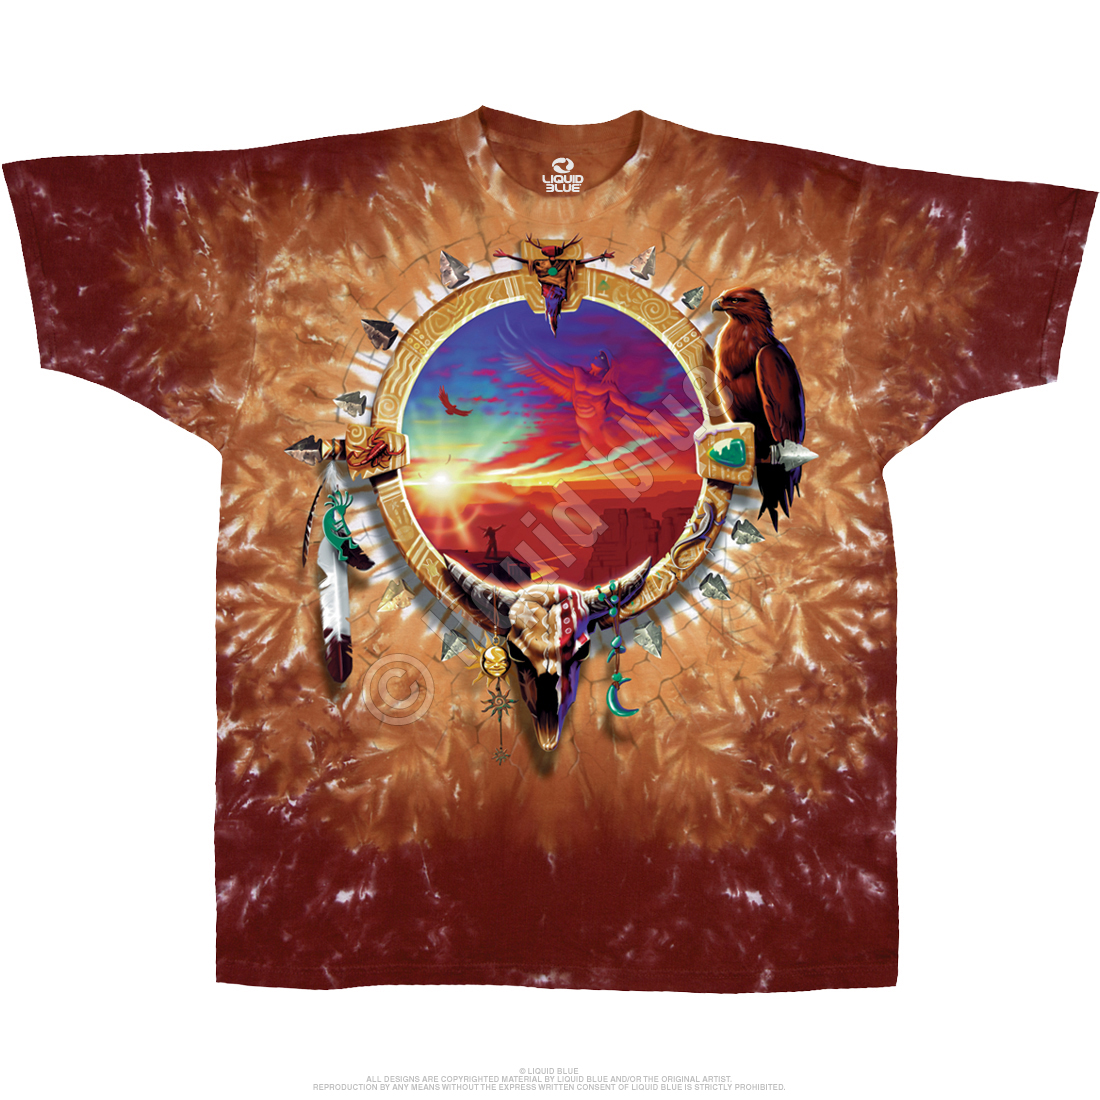 Canyon Sunset American West T-shirt